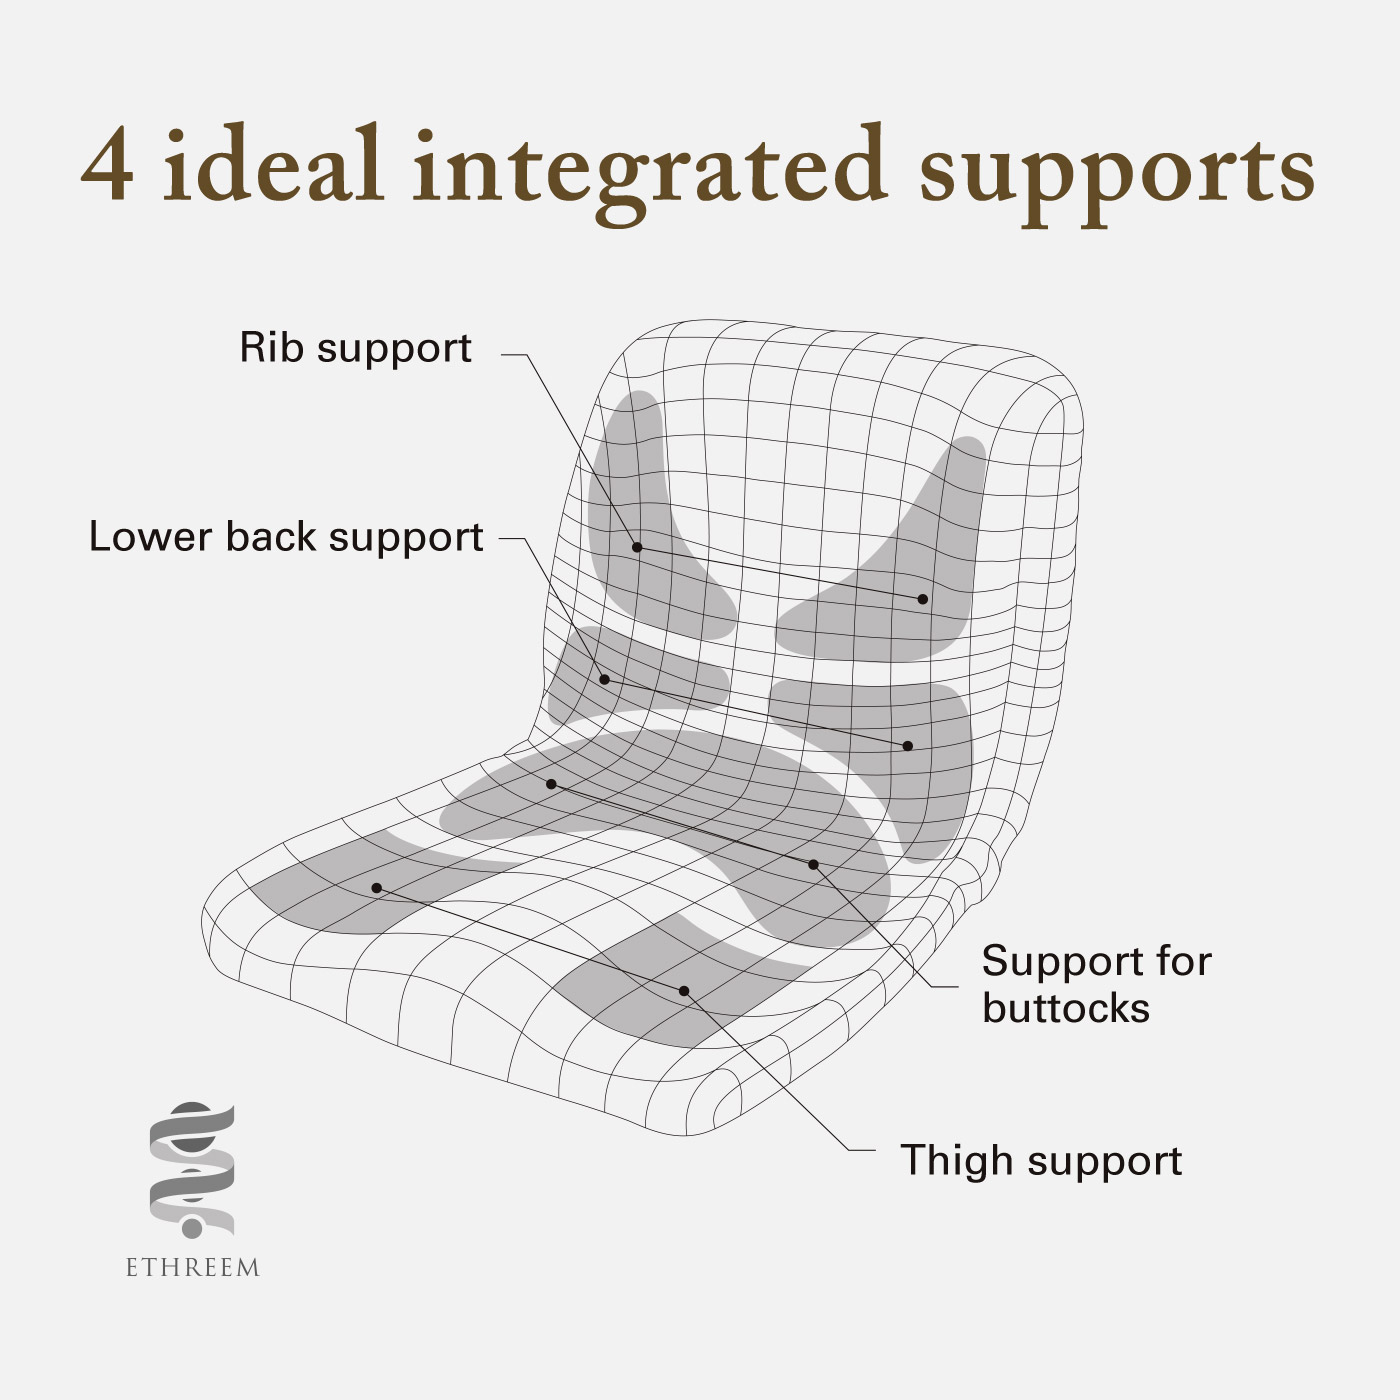 4 ideal integrated supports